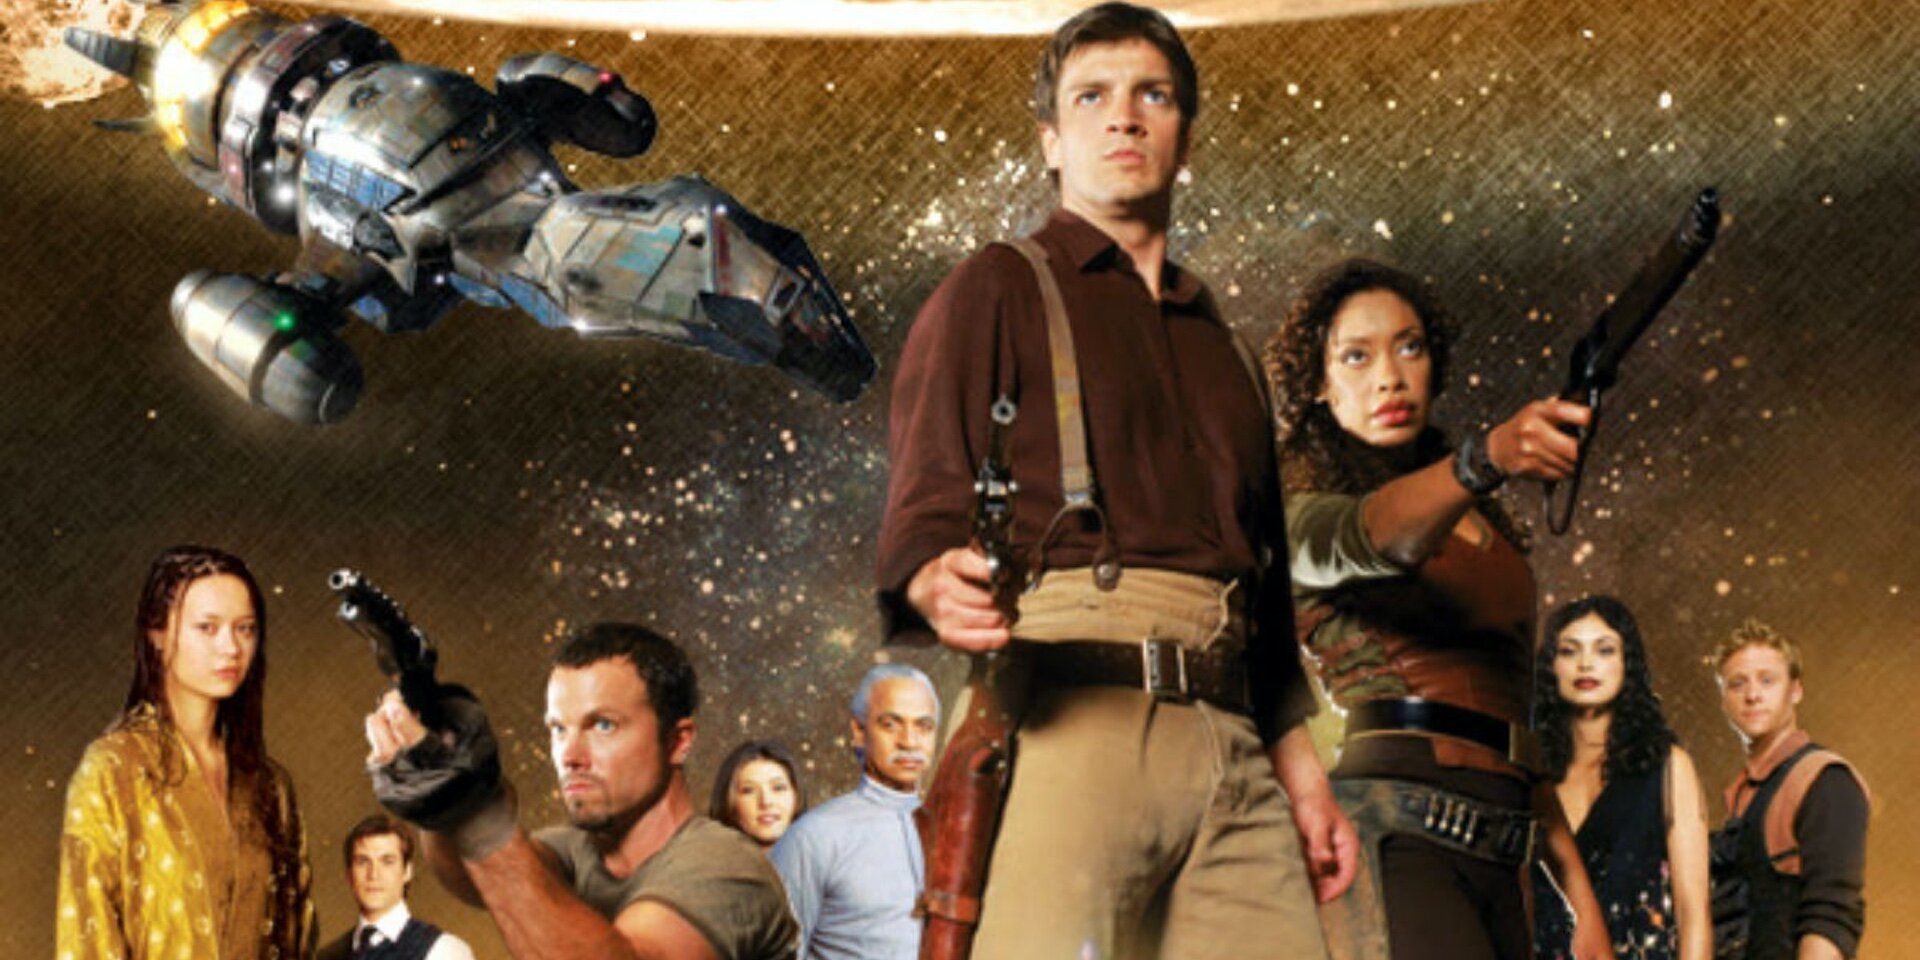 Firefly series cast and Captain Mel Reynolds (Nathan Fillion)